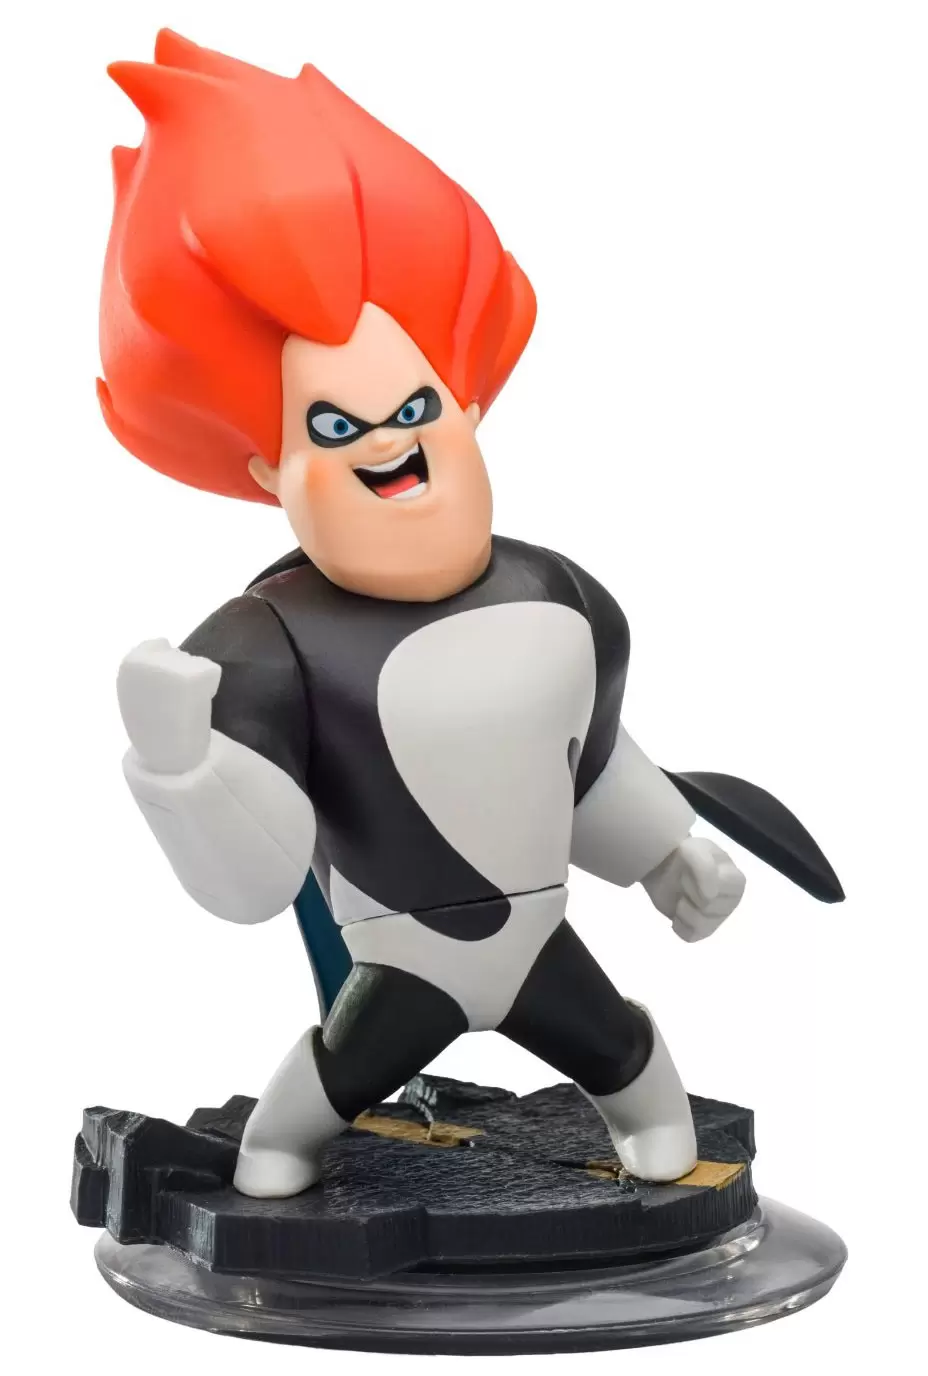 Disney Infinity Action figures - Syndrome